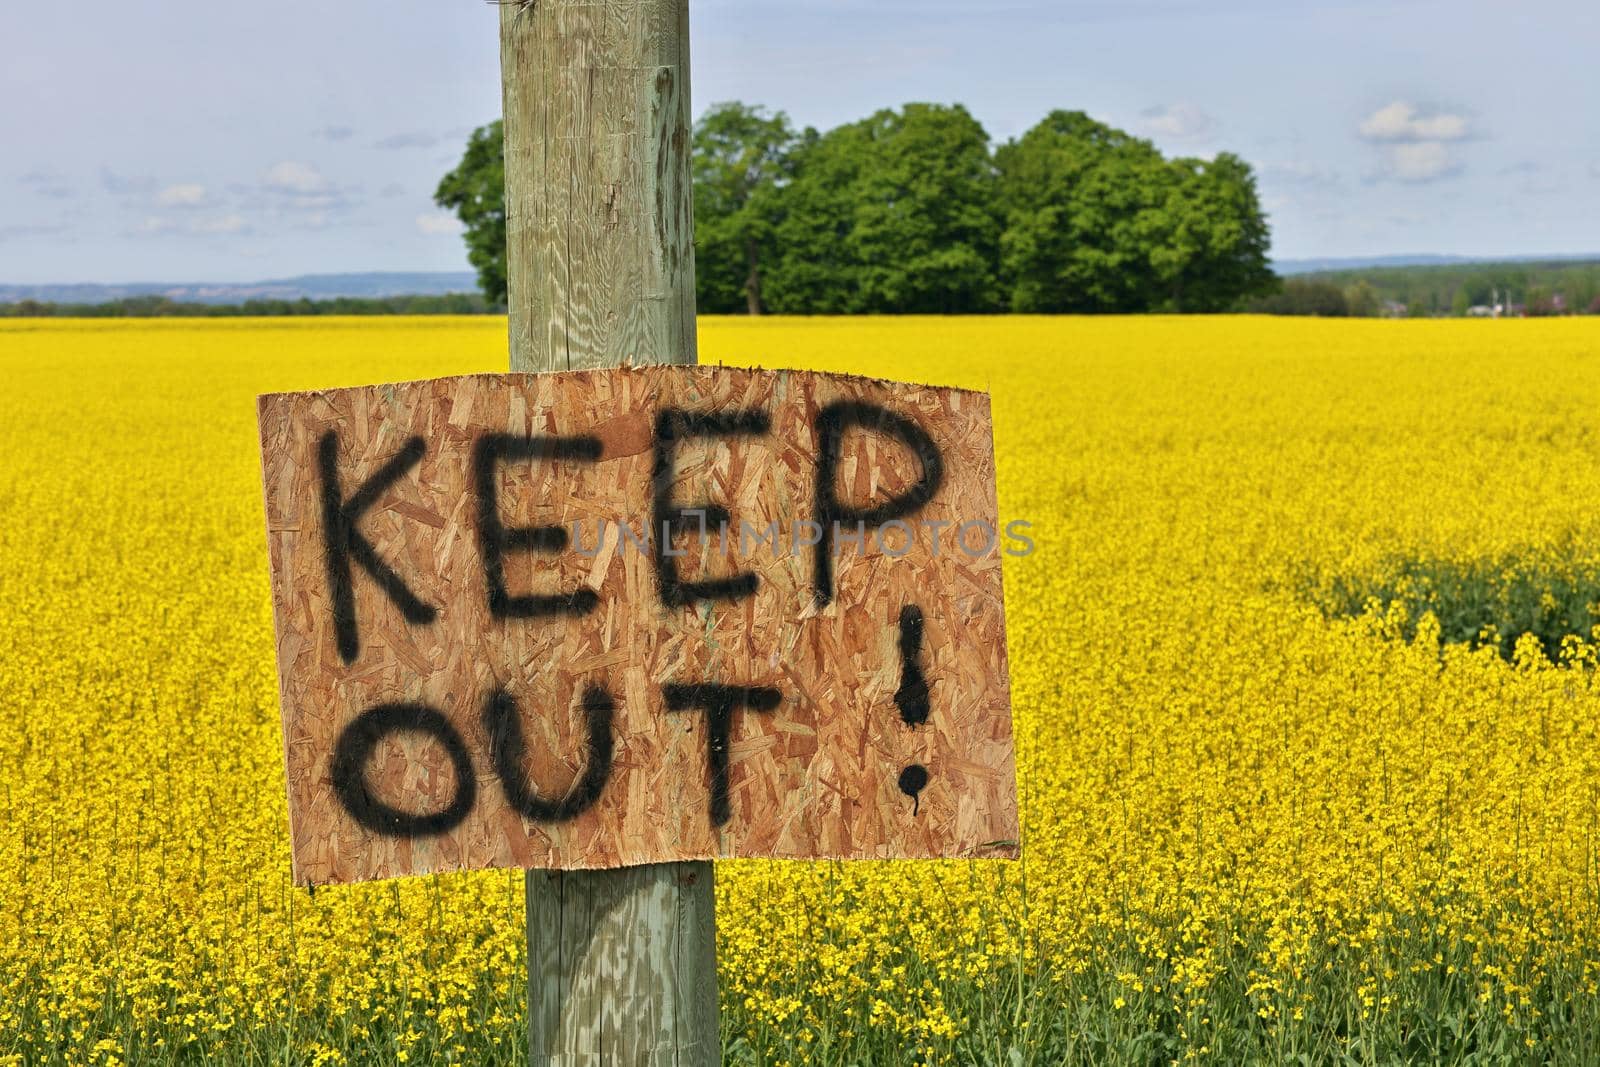 Homemade Keep Out Signs Posted at Edge of Canola Field to Warn Trespassers to Stay Out by markvandam